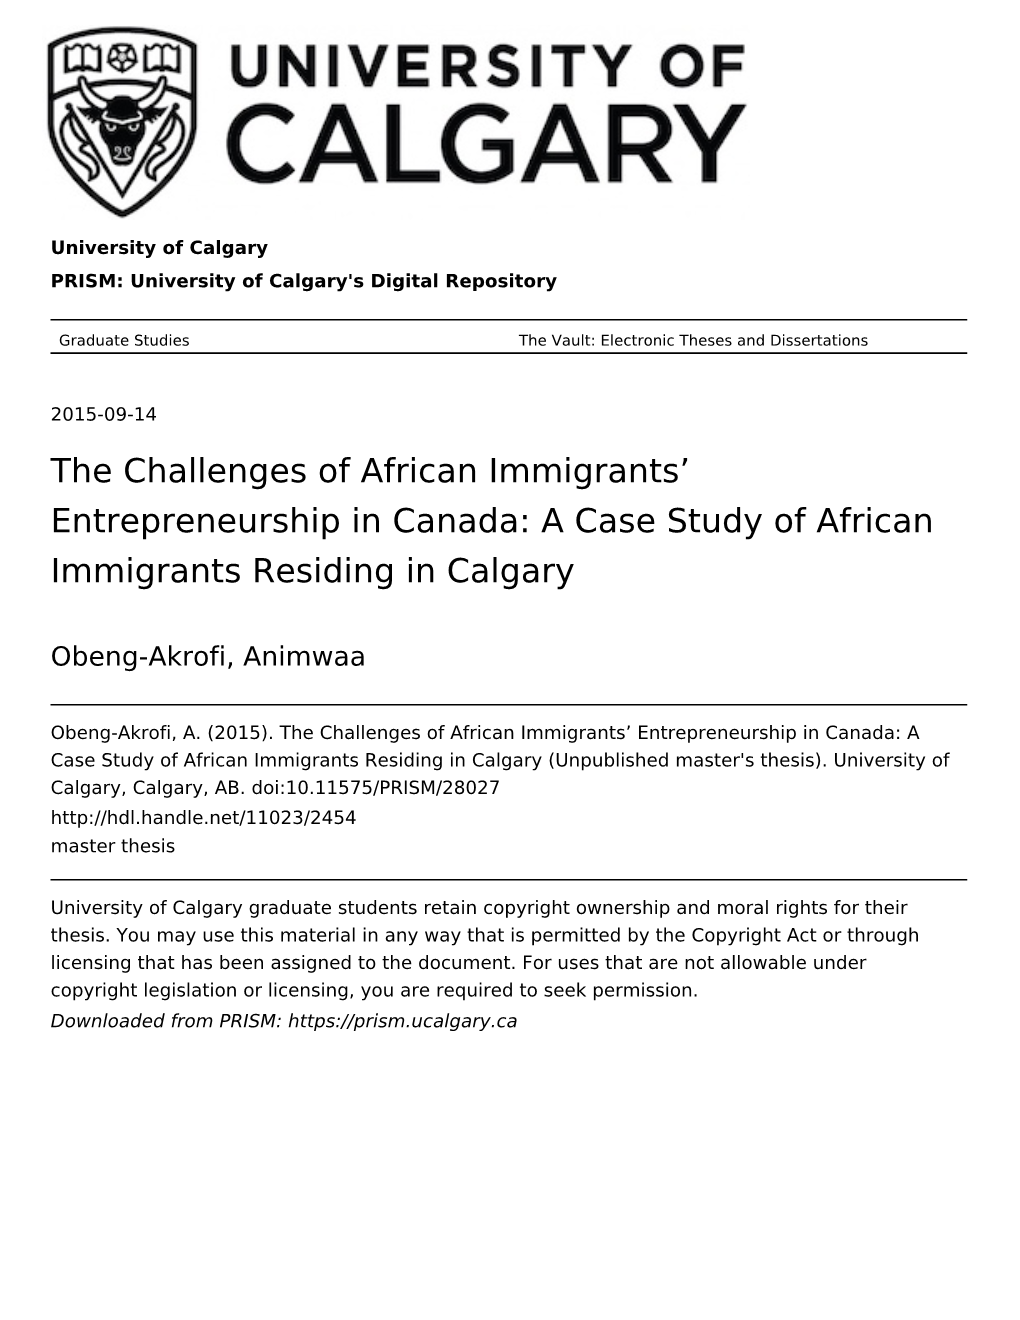 The Challenges of African Immigrants’ Entrepreneurship in Canada: a Case Study of African Immigrants Residing in Calgary